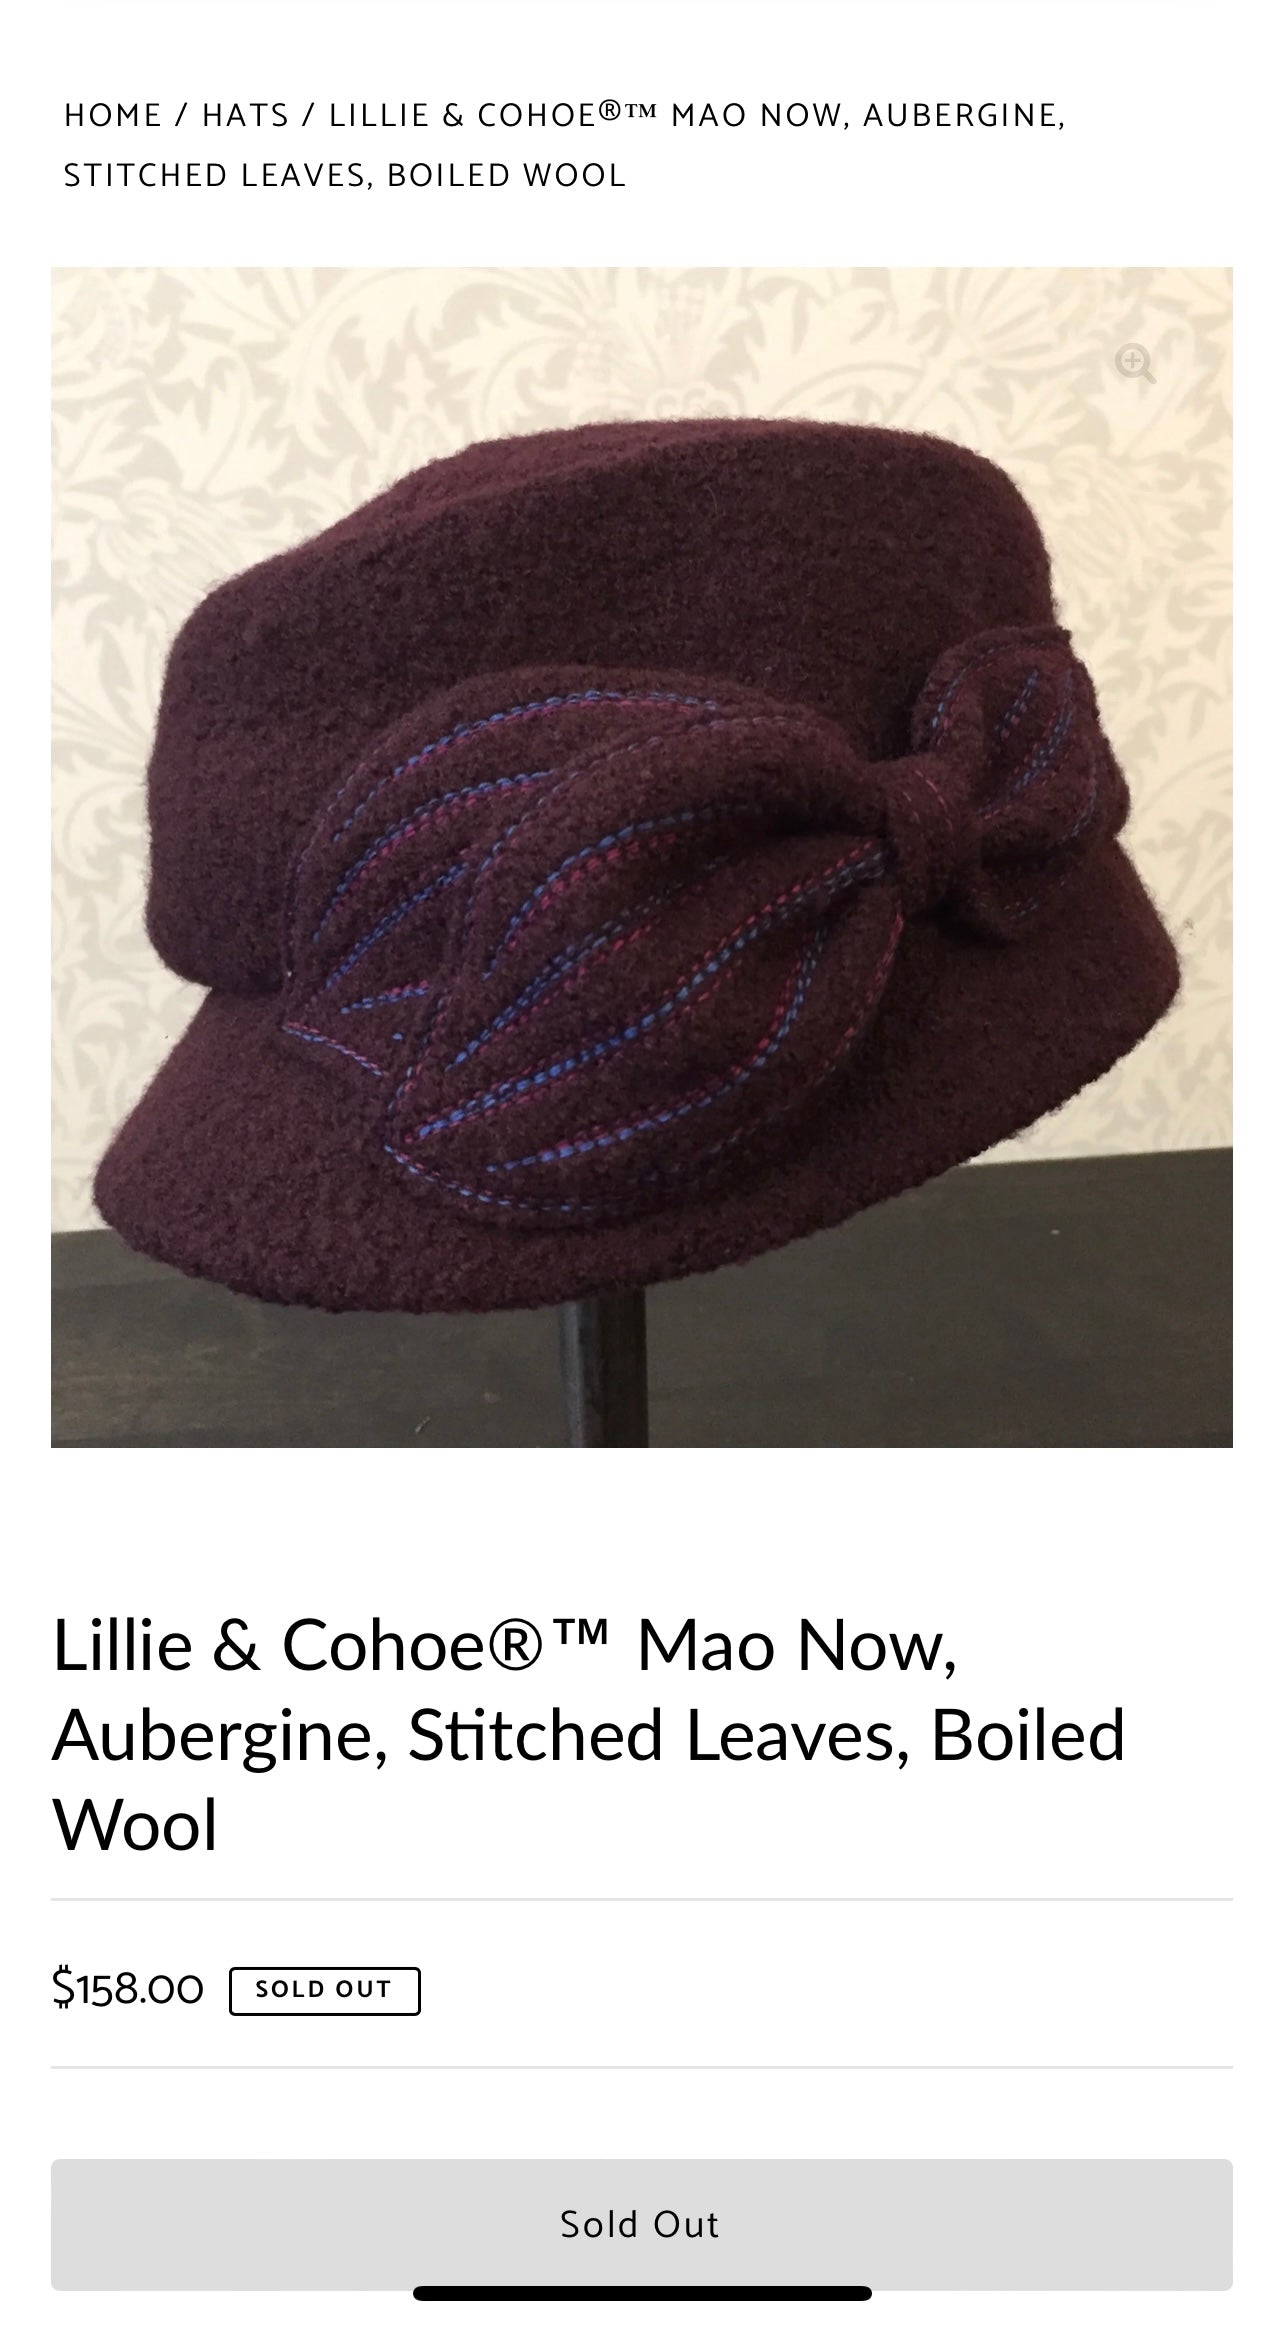 Lillie & Cohoe®™ Mao Now, Aubergine, Stitched Leaves, Boiled Wool